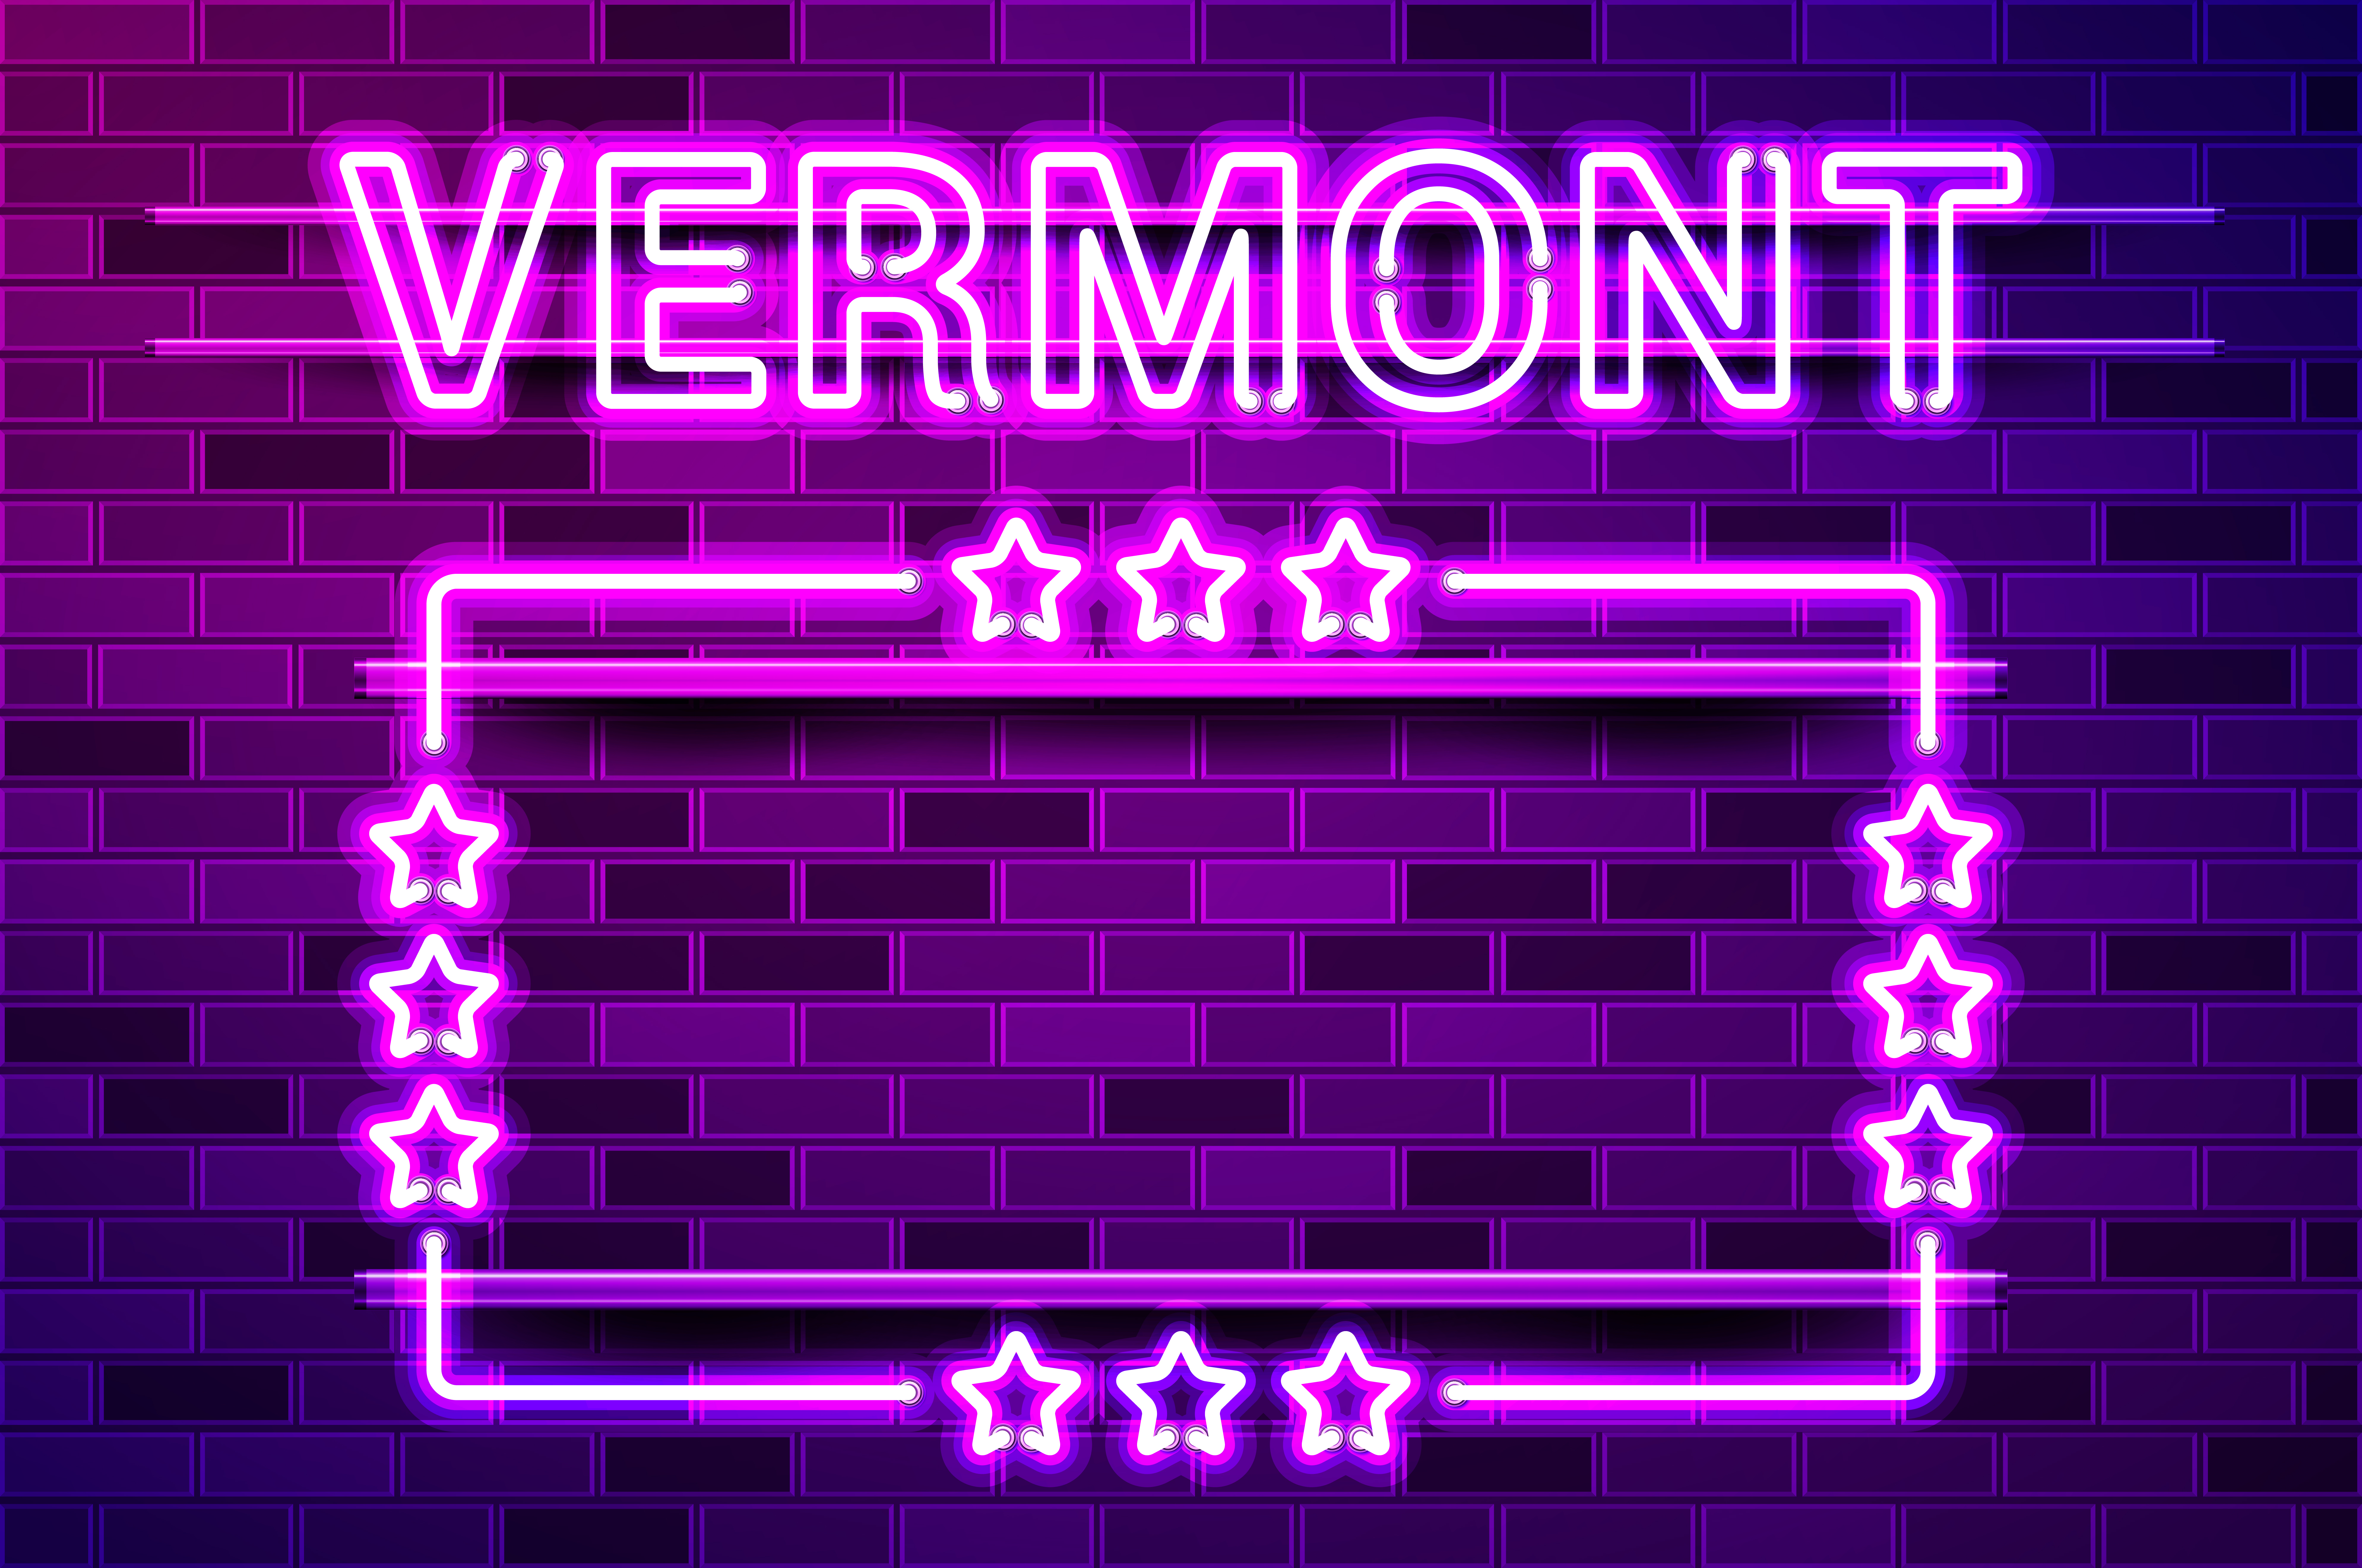 Vermont US State glowing purple neon lettering and a rectangular frame with stars. Realistic vector illustration. Purple brick wall, violet glow, metal holders.. Vermont US State glowing purple neon lettering and a rectangular frame with stars